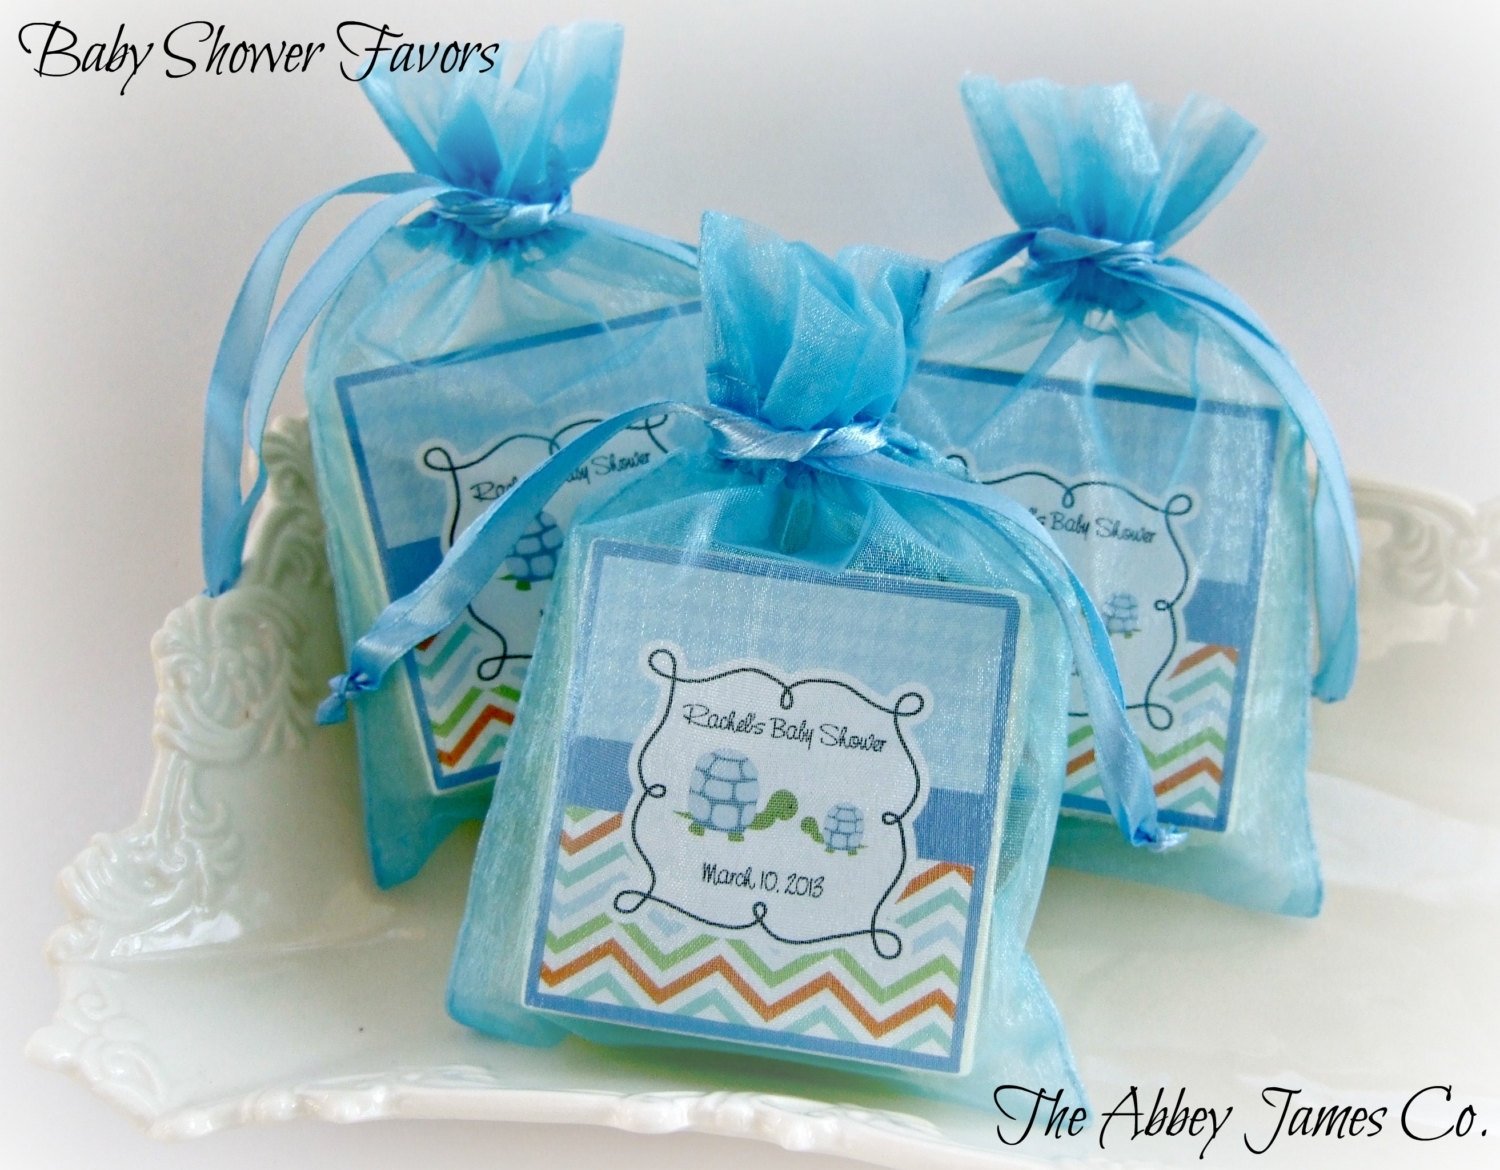 10 Gorgeous Baby Shower Favors Ideas For Boys baby shower favor ideas boy e280a2 baby showers ideas 1 2022